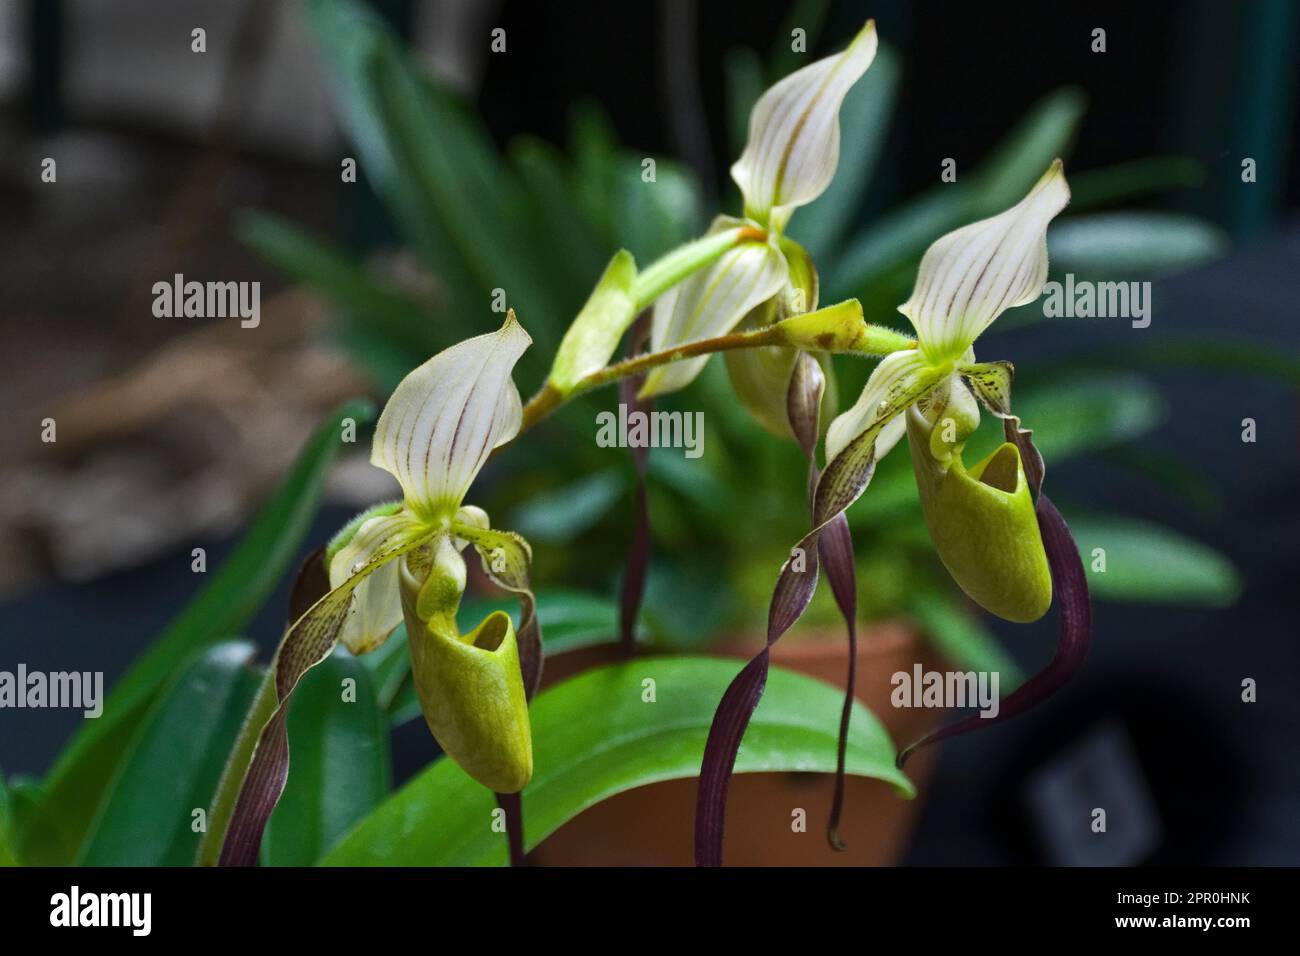 Tropical paphiopedilum, green slipper, ochid flowers with white petals blooming in autumn Stock Photo